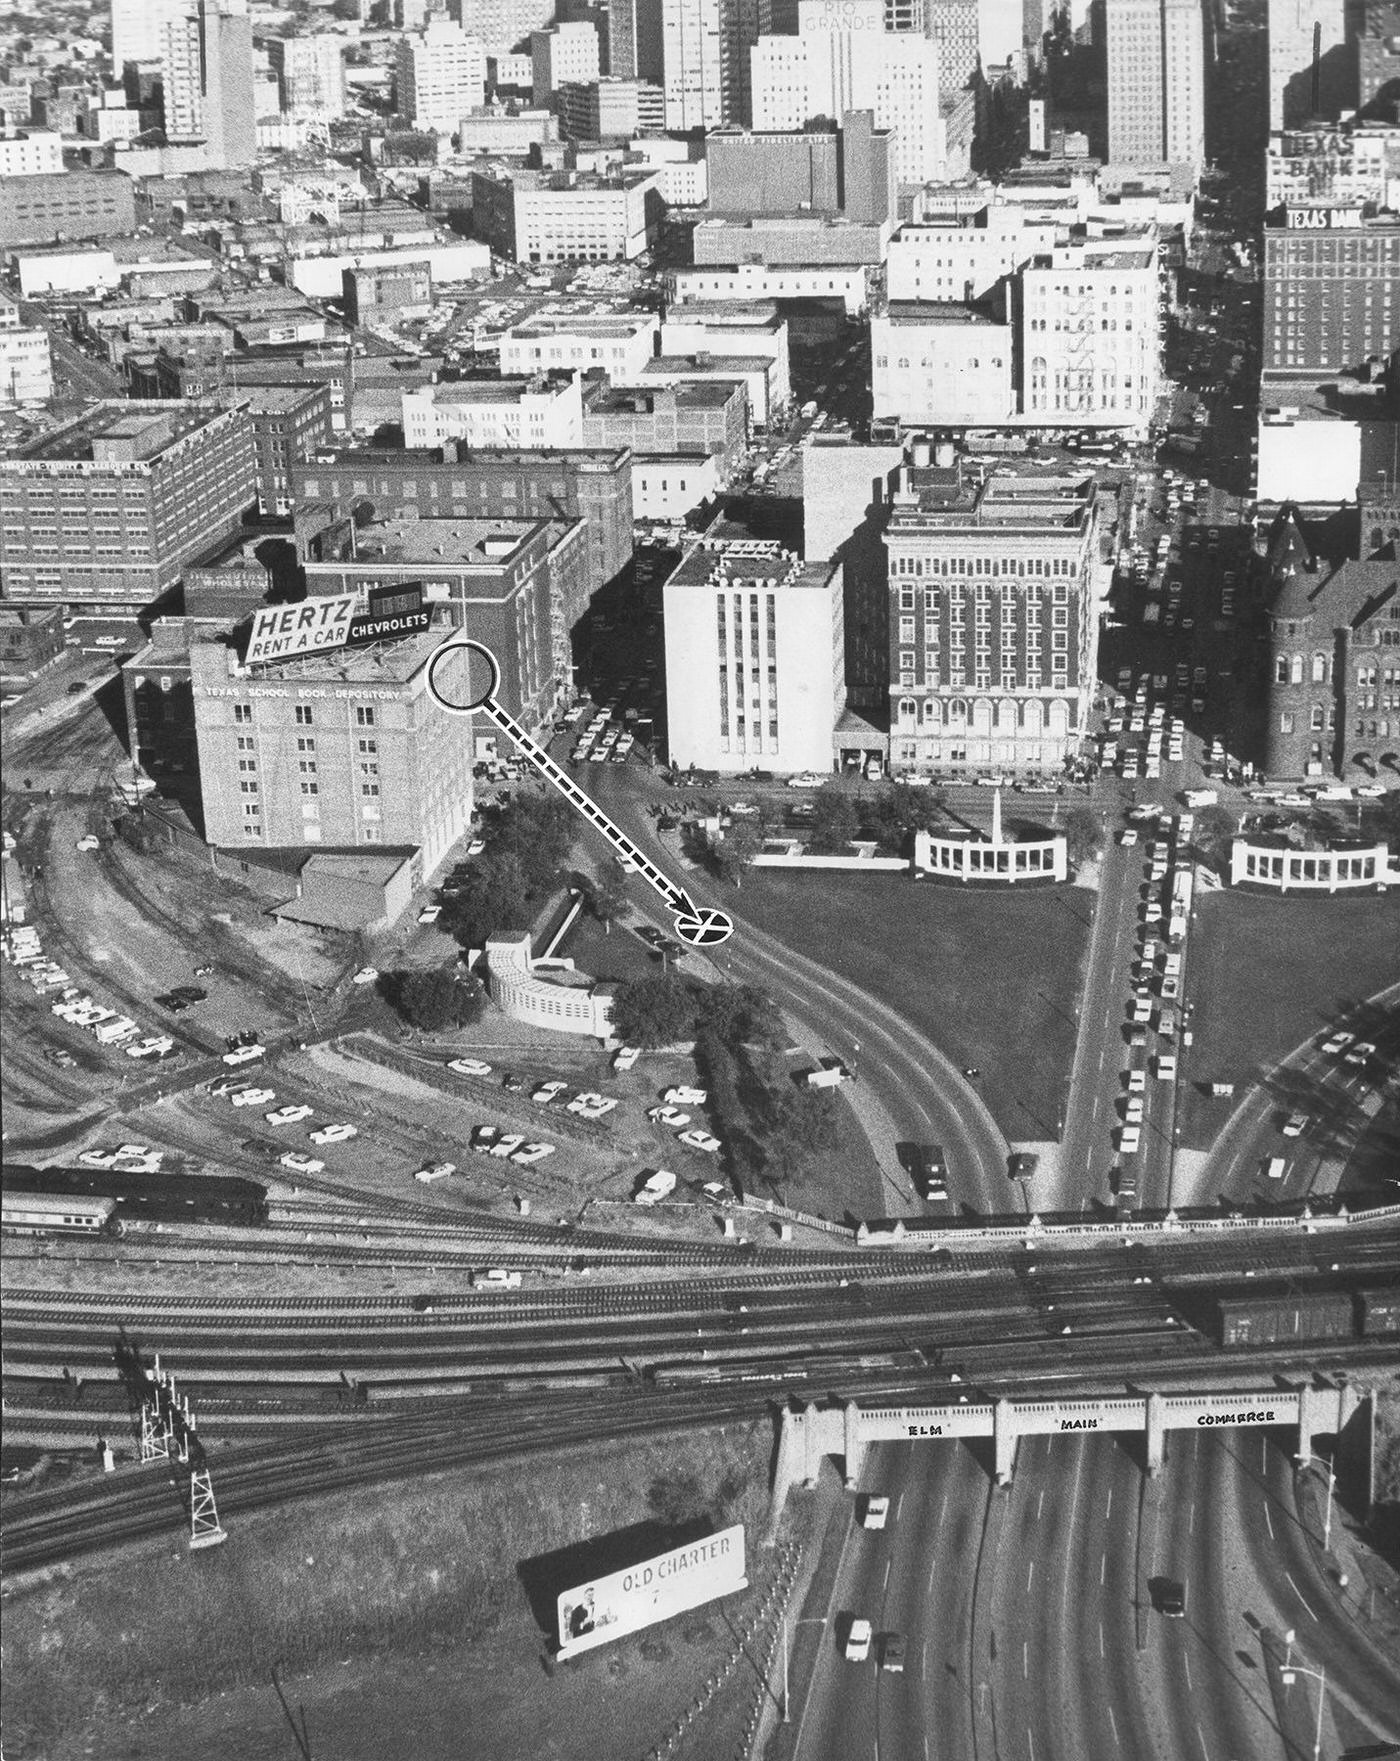 Airview of Dealey Plaza and Texas School Book Depository following assassination of President John F. Kennedy, 1963